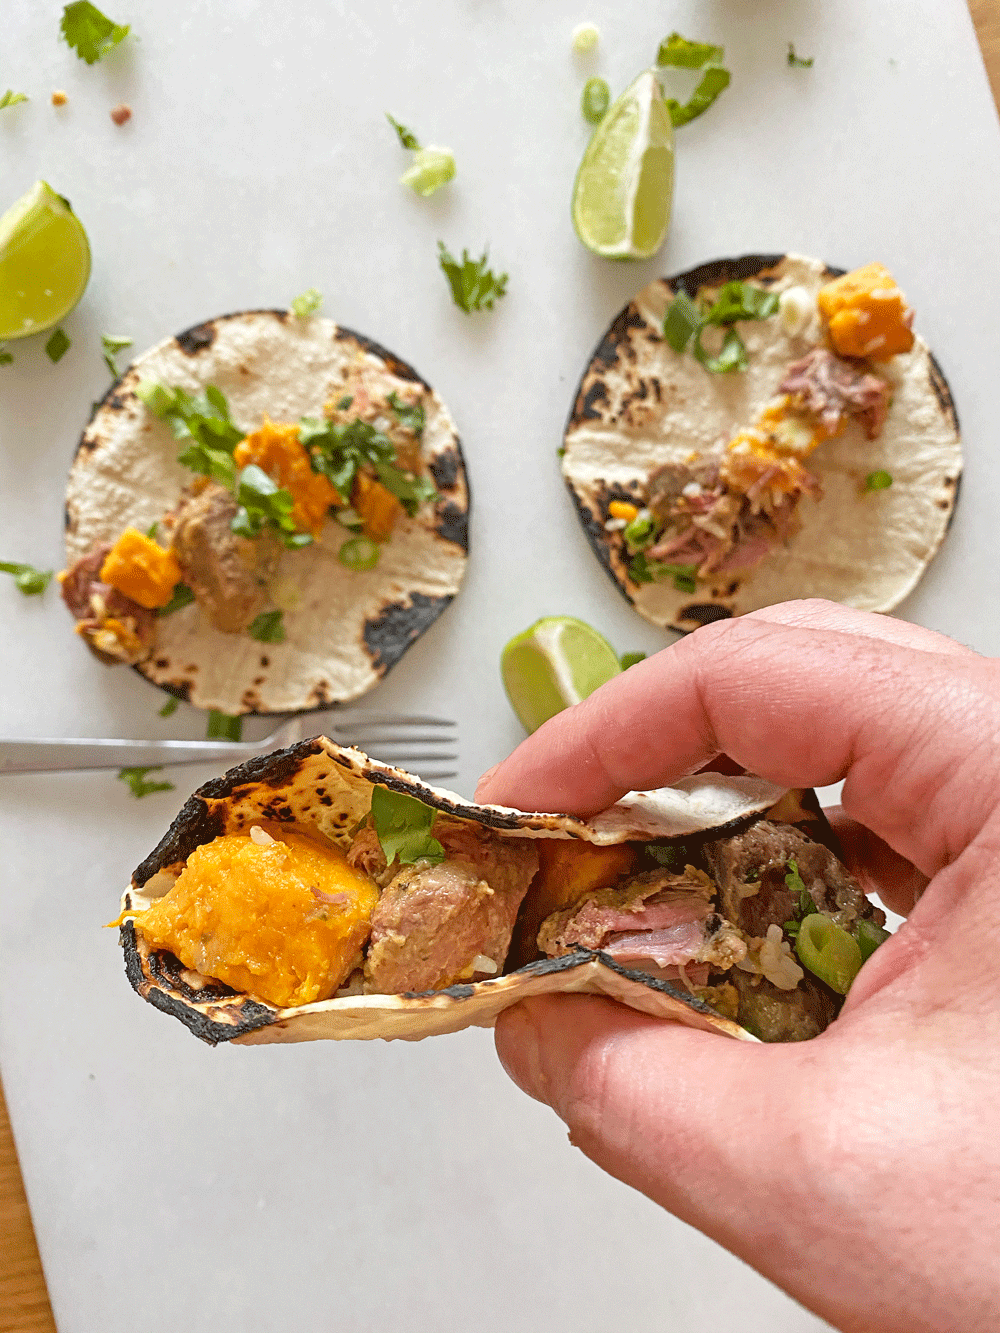 3 Ingredient Slow Cooker Pork and Sweet Potato Taco Recipe.This is a five ingredient dinner recipe that is ready when you get home from work. You can make this into tacos, burrito bowls, or soup if you add chicken broth. Happy Cooking! www.ChopHappy.com #slowcookertaco #porktaco